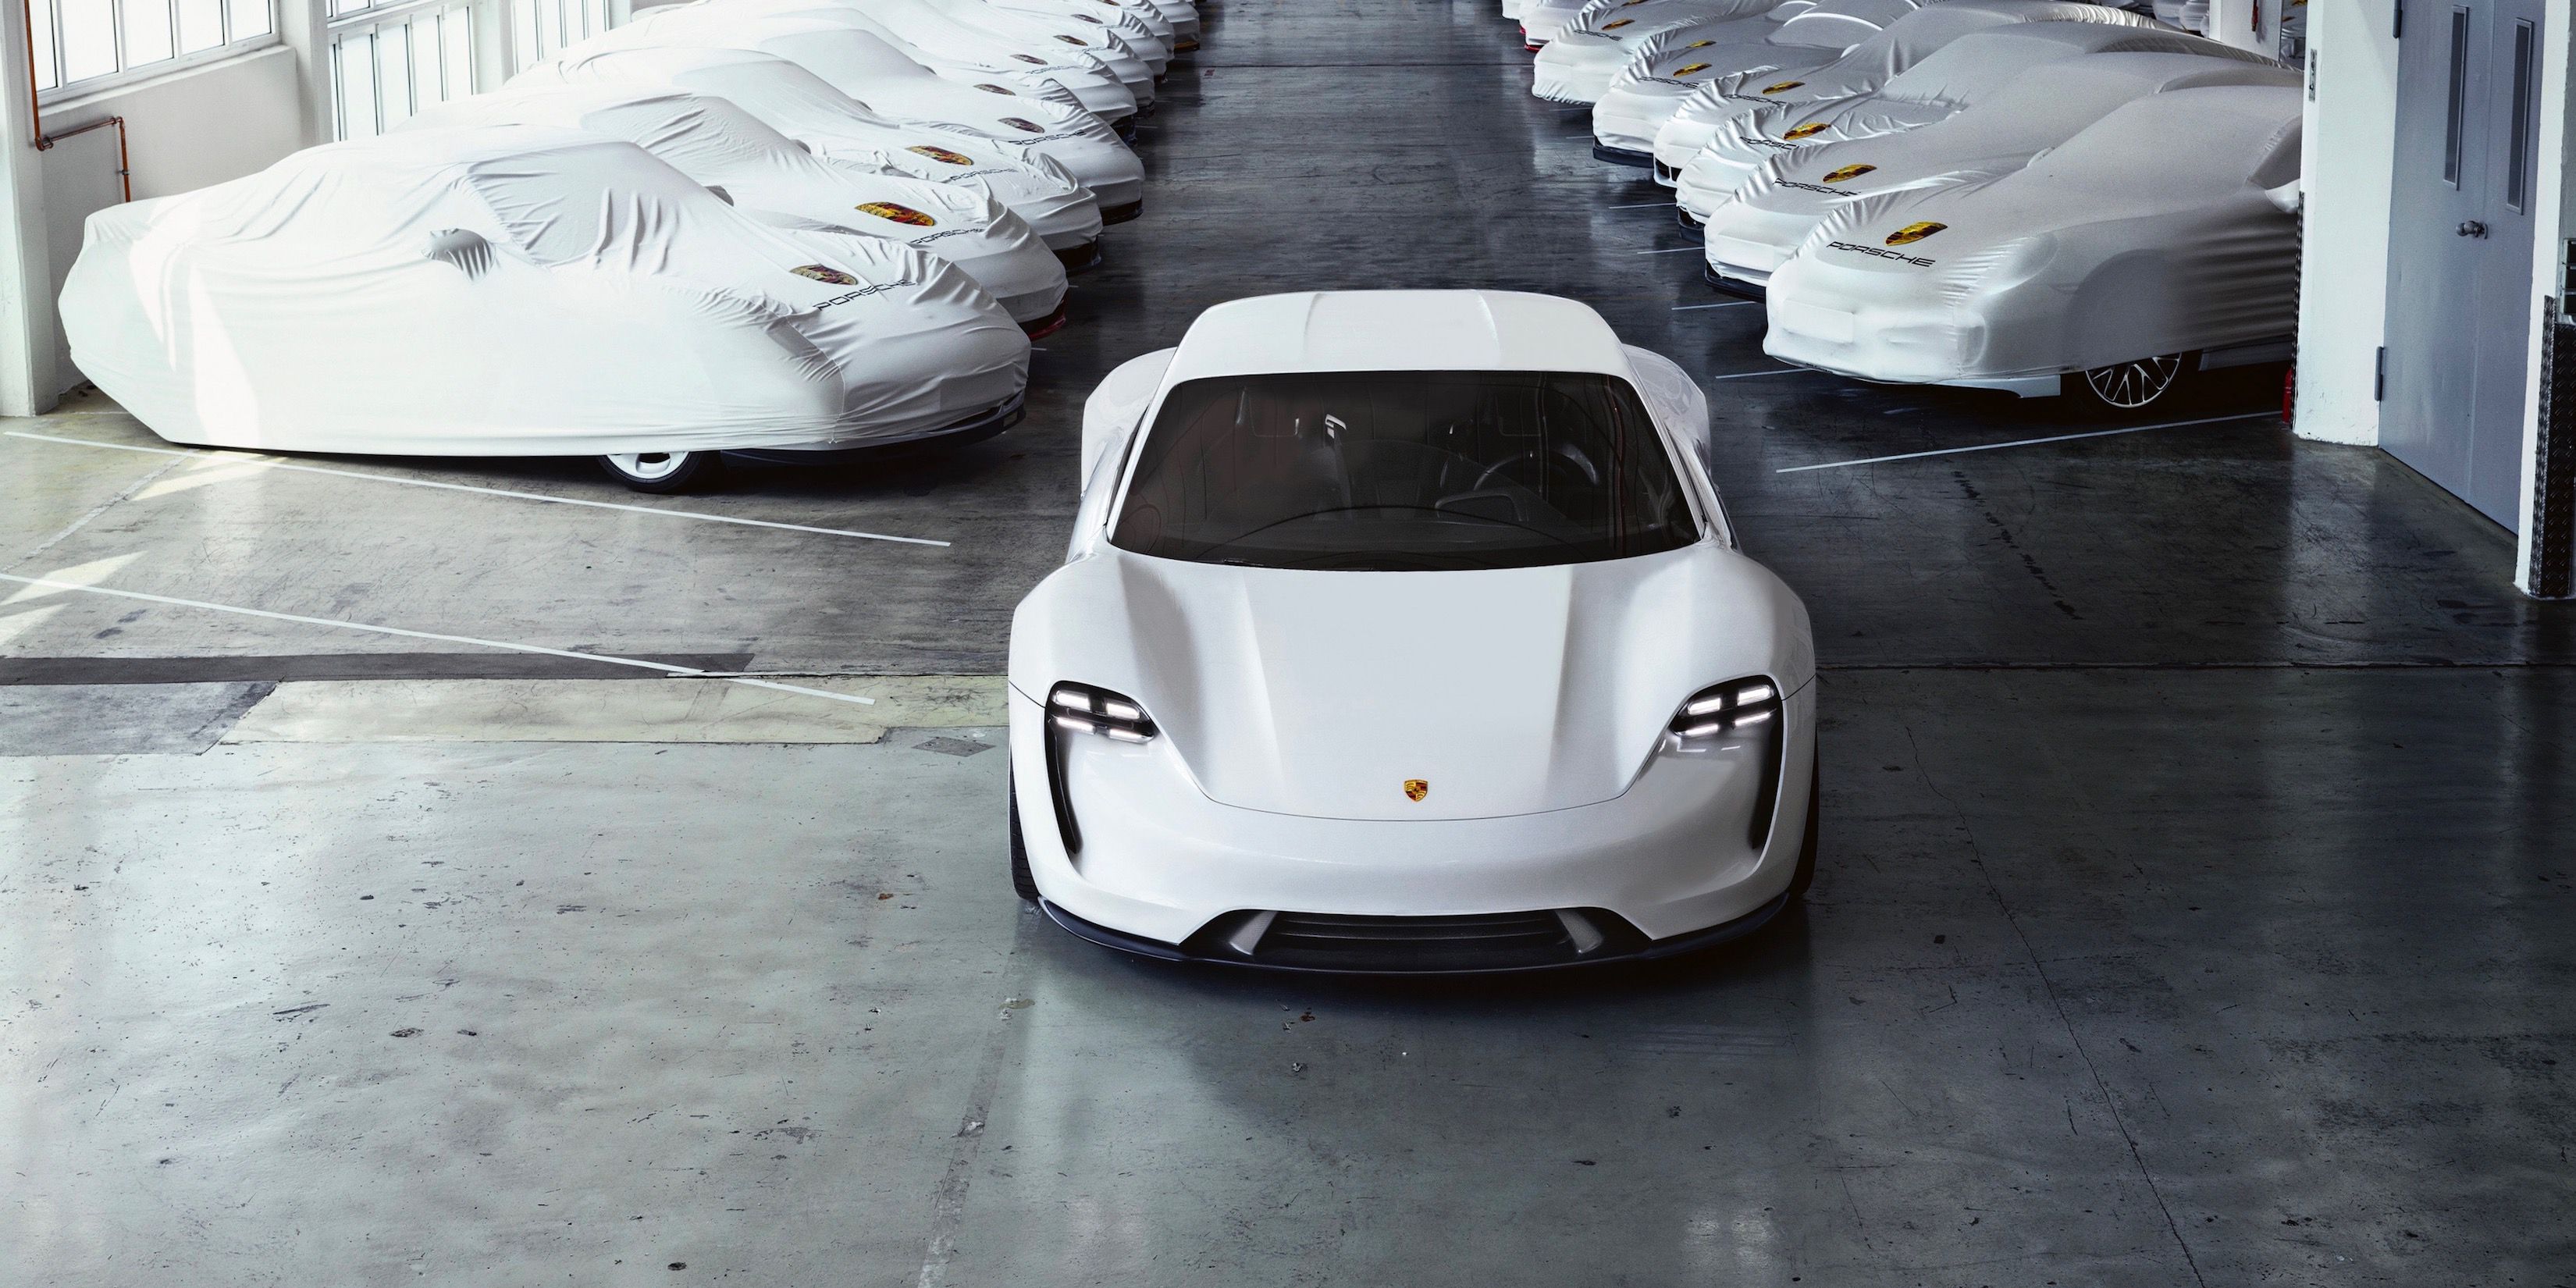 All the coolest facts about the new electric Porsche Taycan (and 911 Speedster Concept)